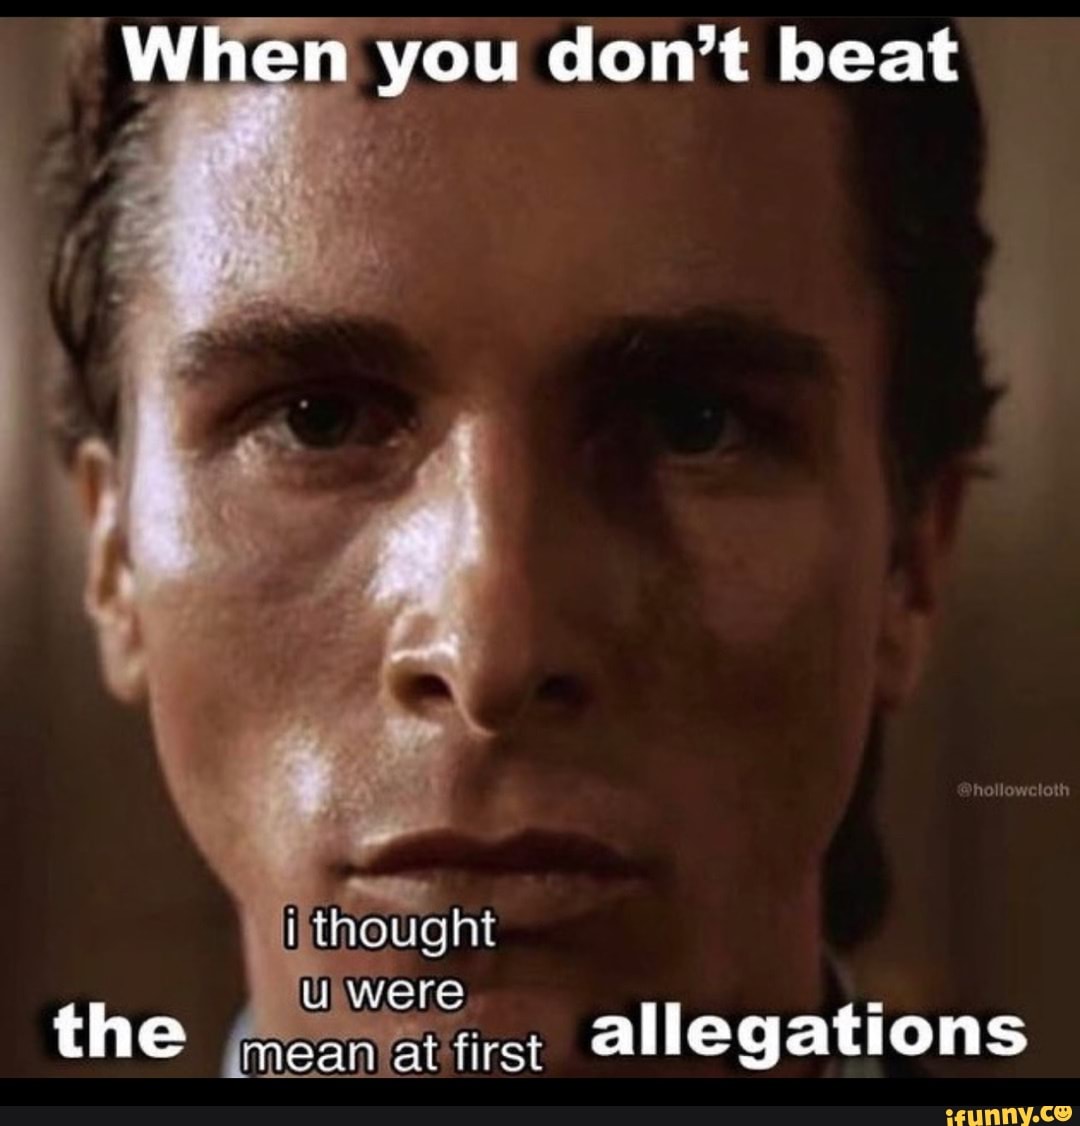 when you beat the allegations meme